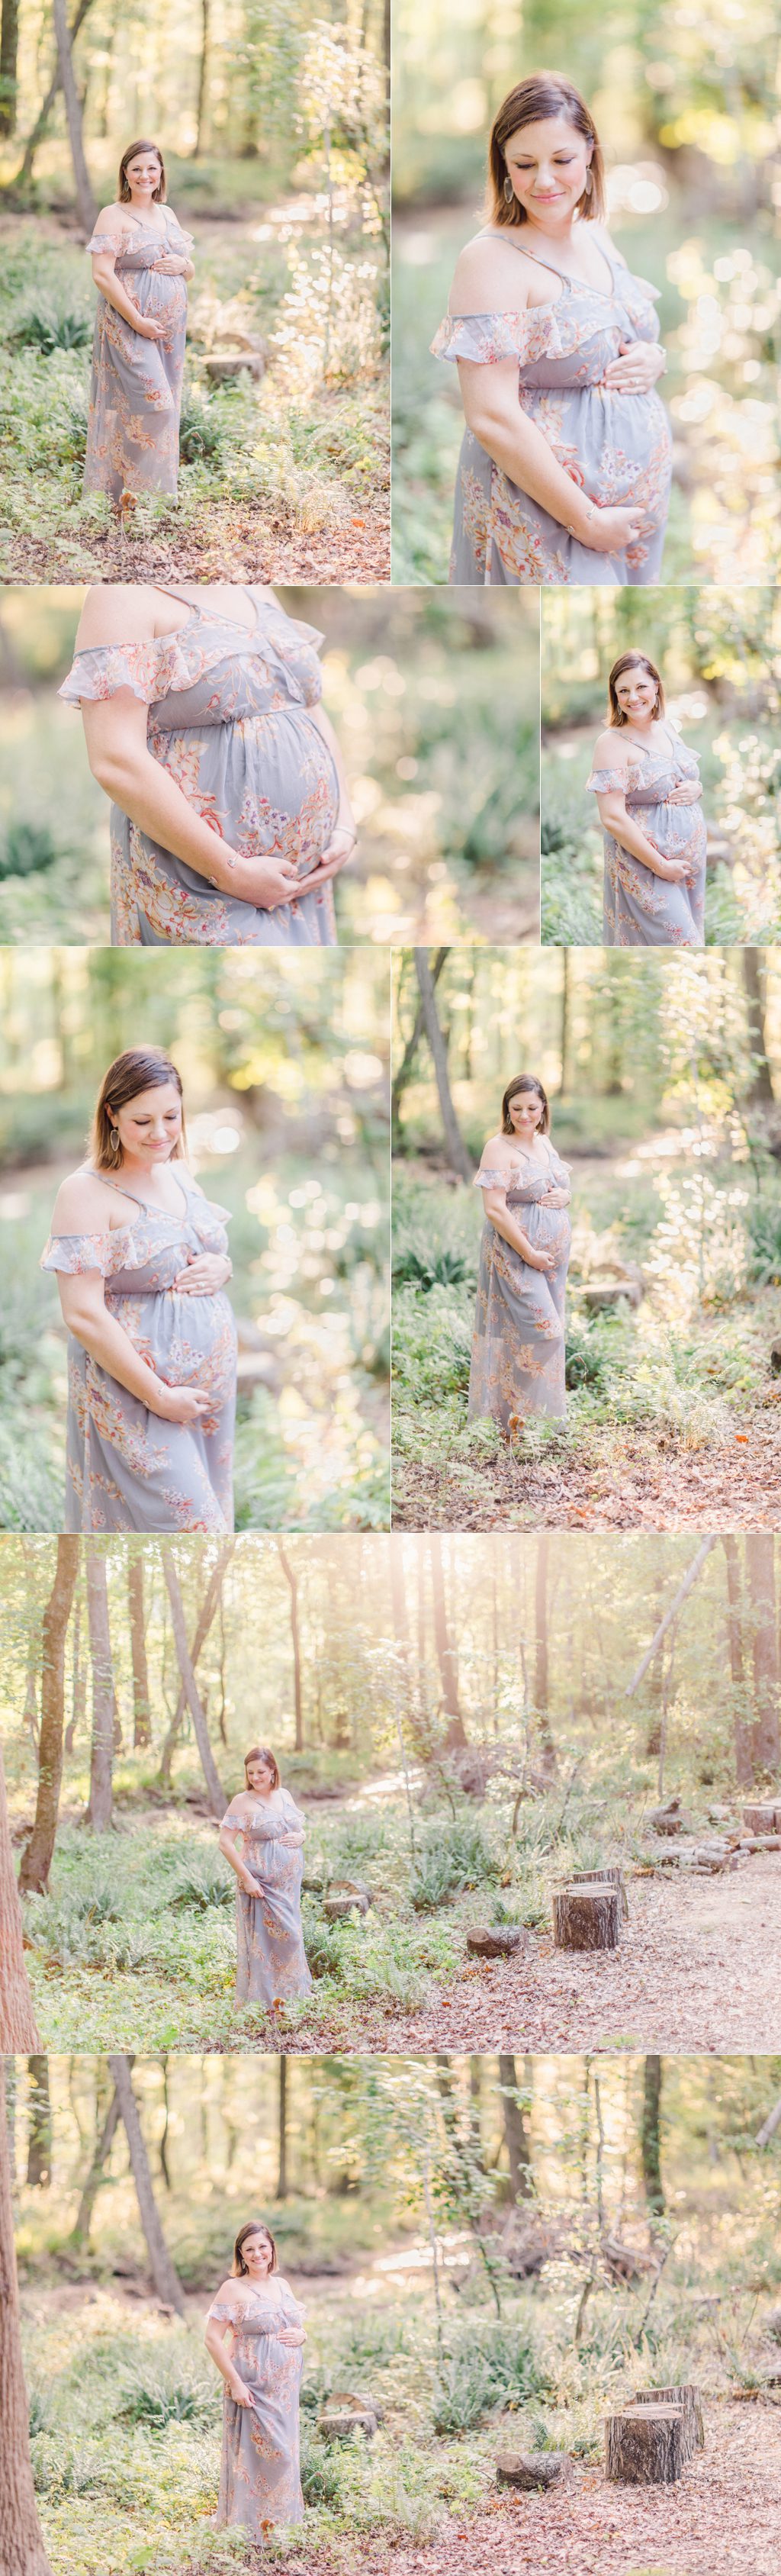 Best time for pregnancy photoshoot